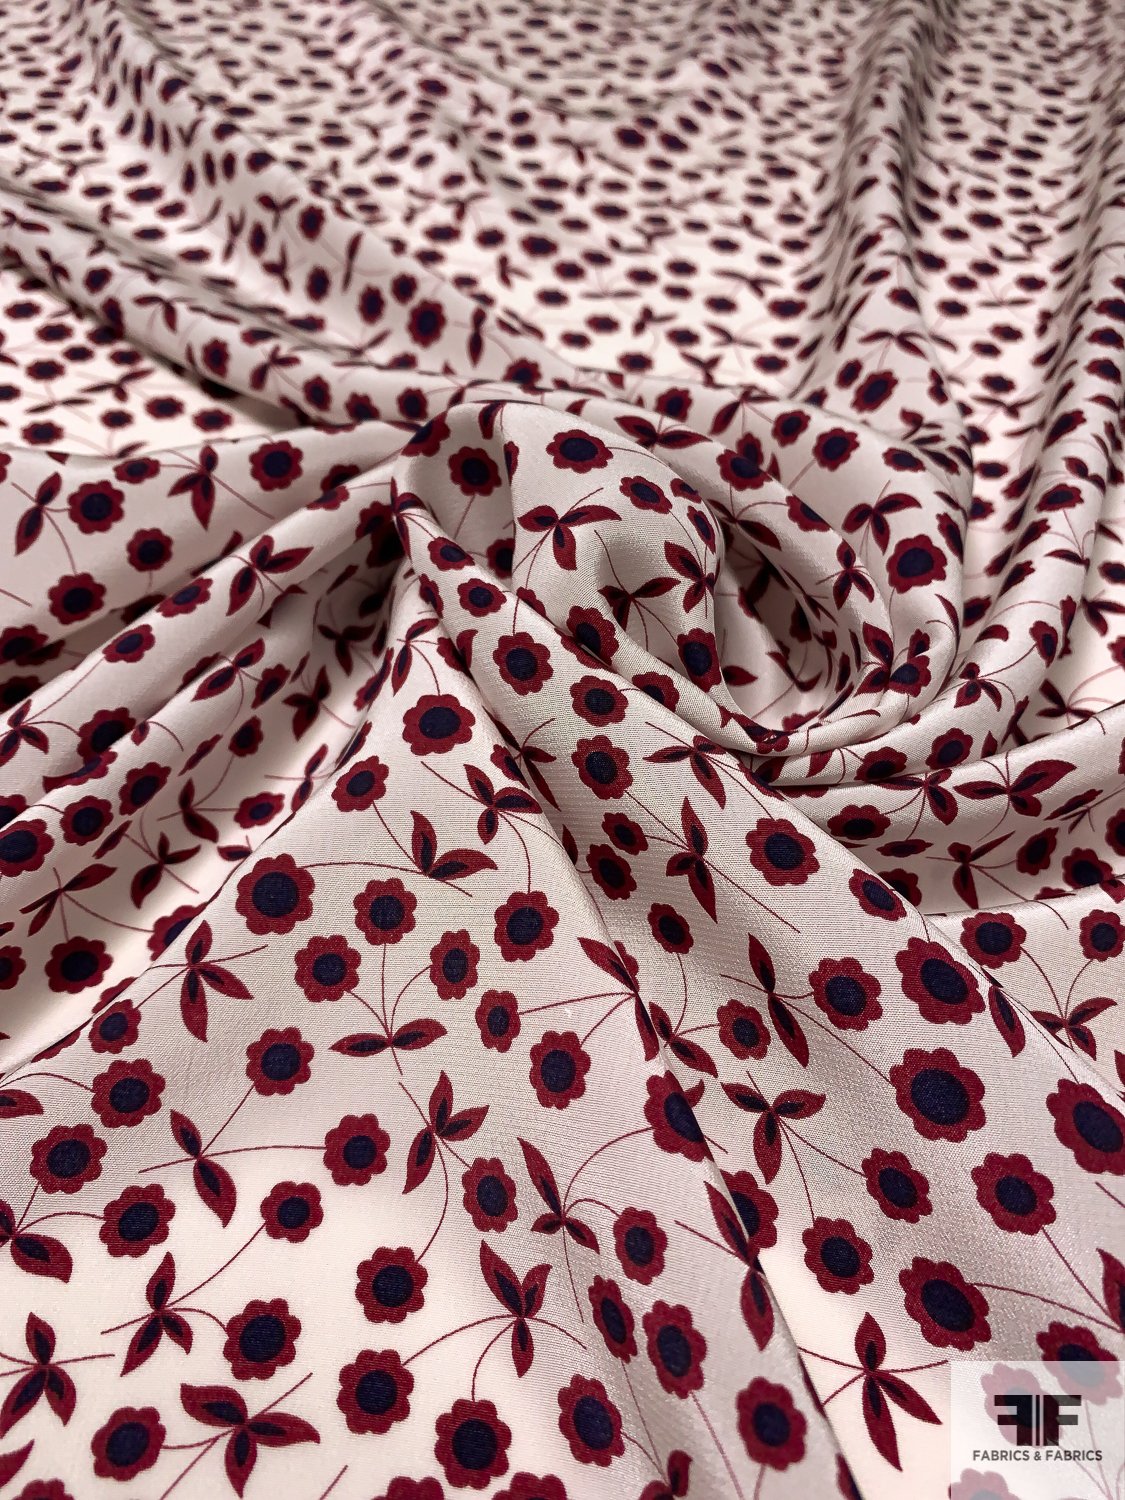 Ditsy Floral Printed Silk Crepe de Chine - Wine Red / Navy / White